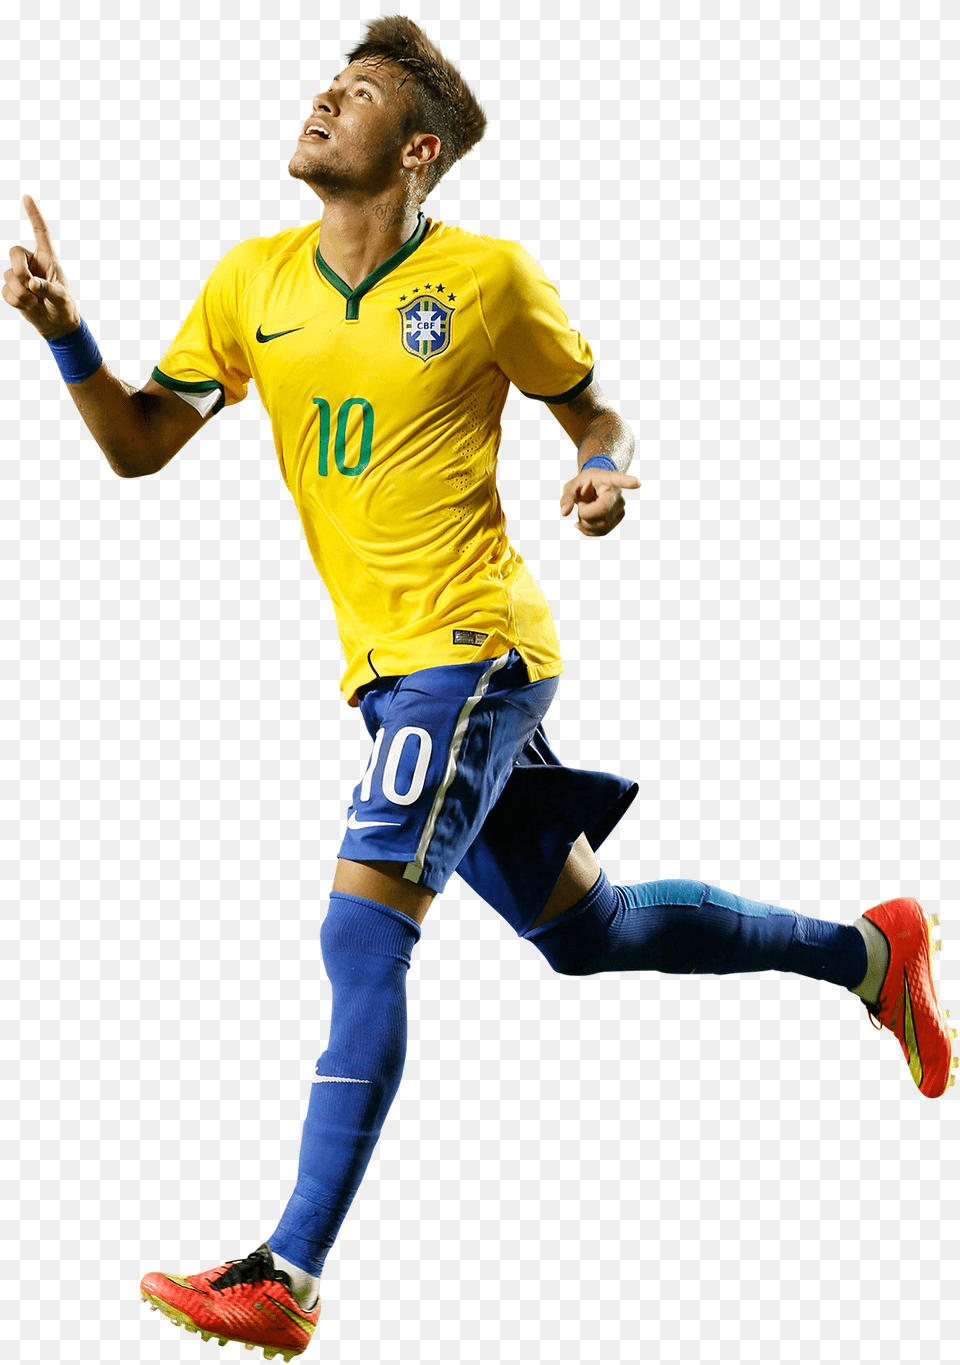 2018 World Cup Neymar Background Neymar, Person, Body Part, Clothing, Finger Png Image